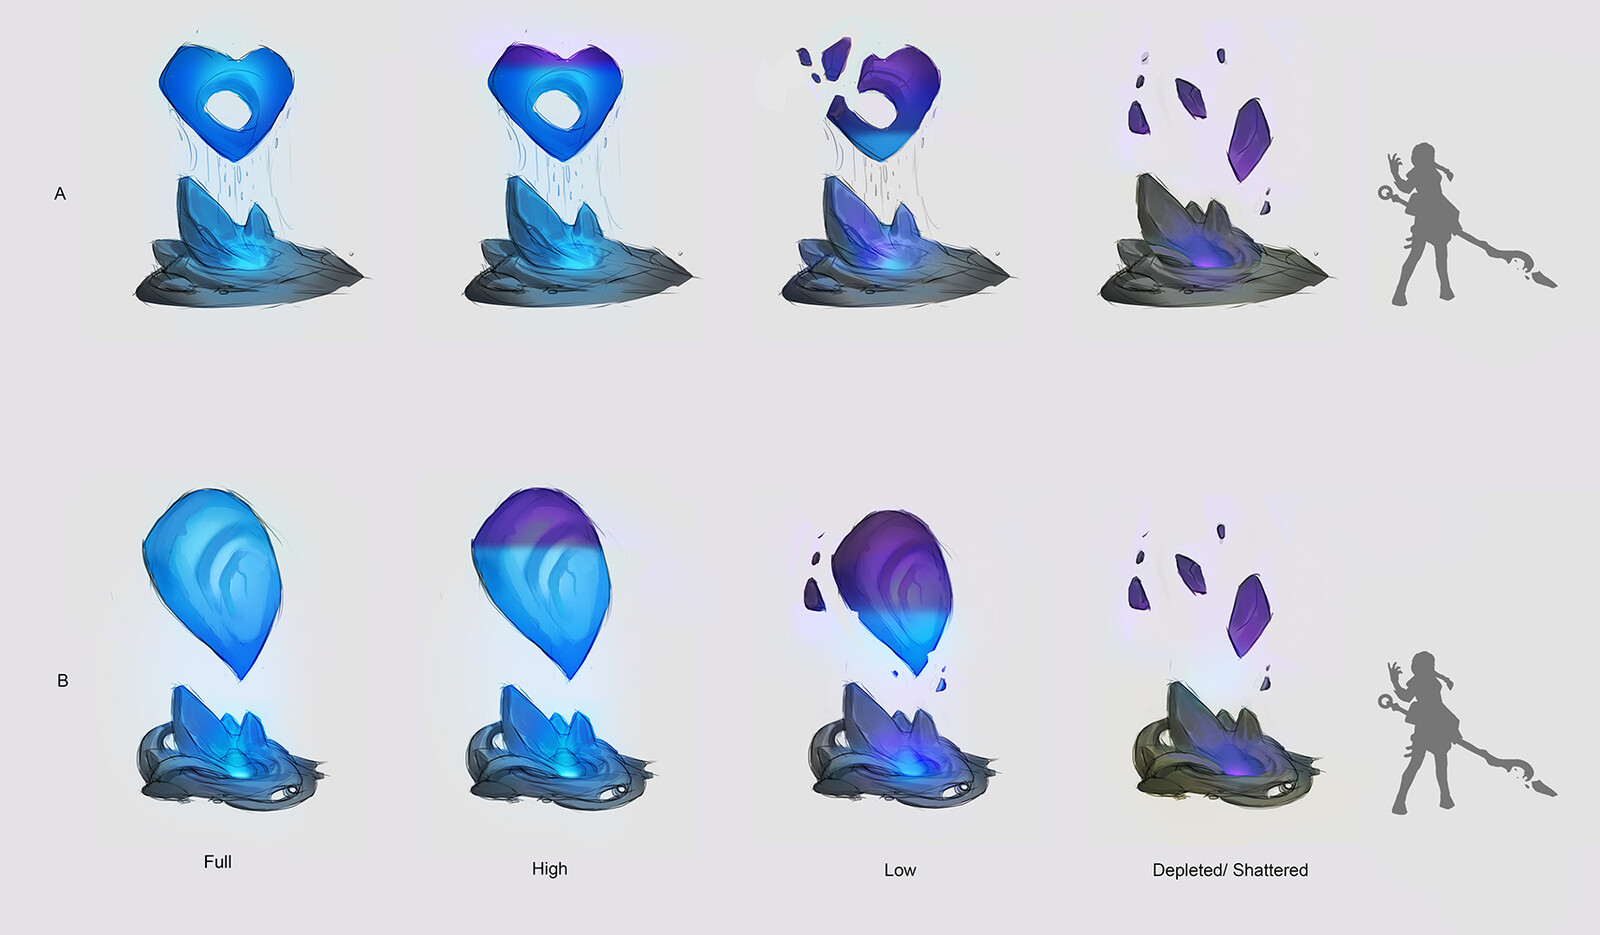 Heart of the Island - Variations with depletion